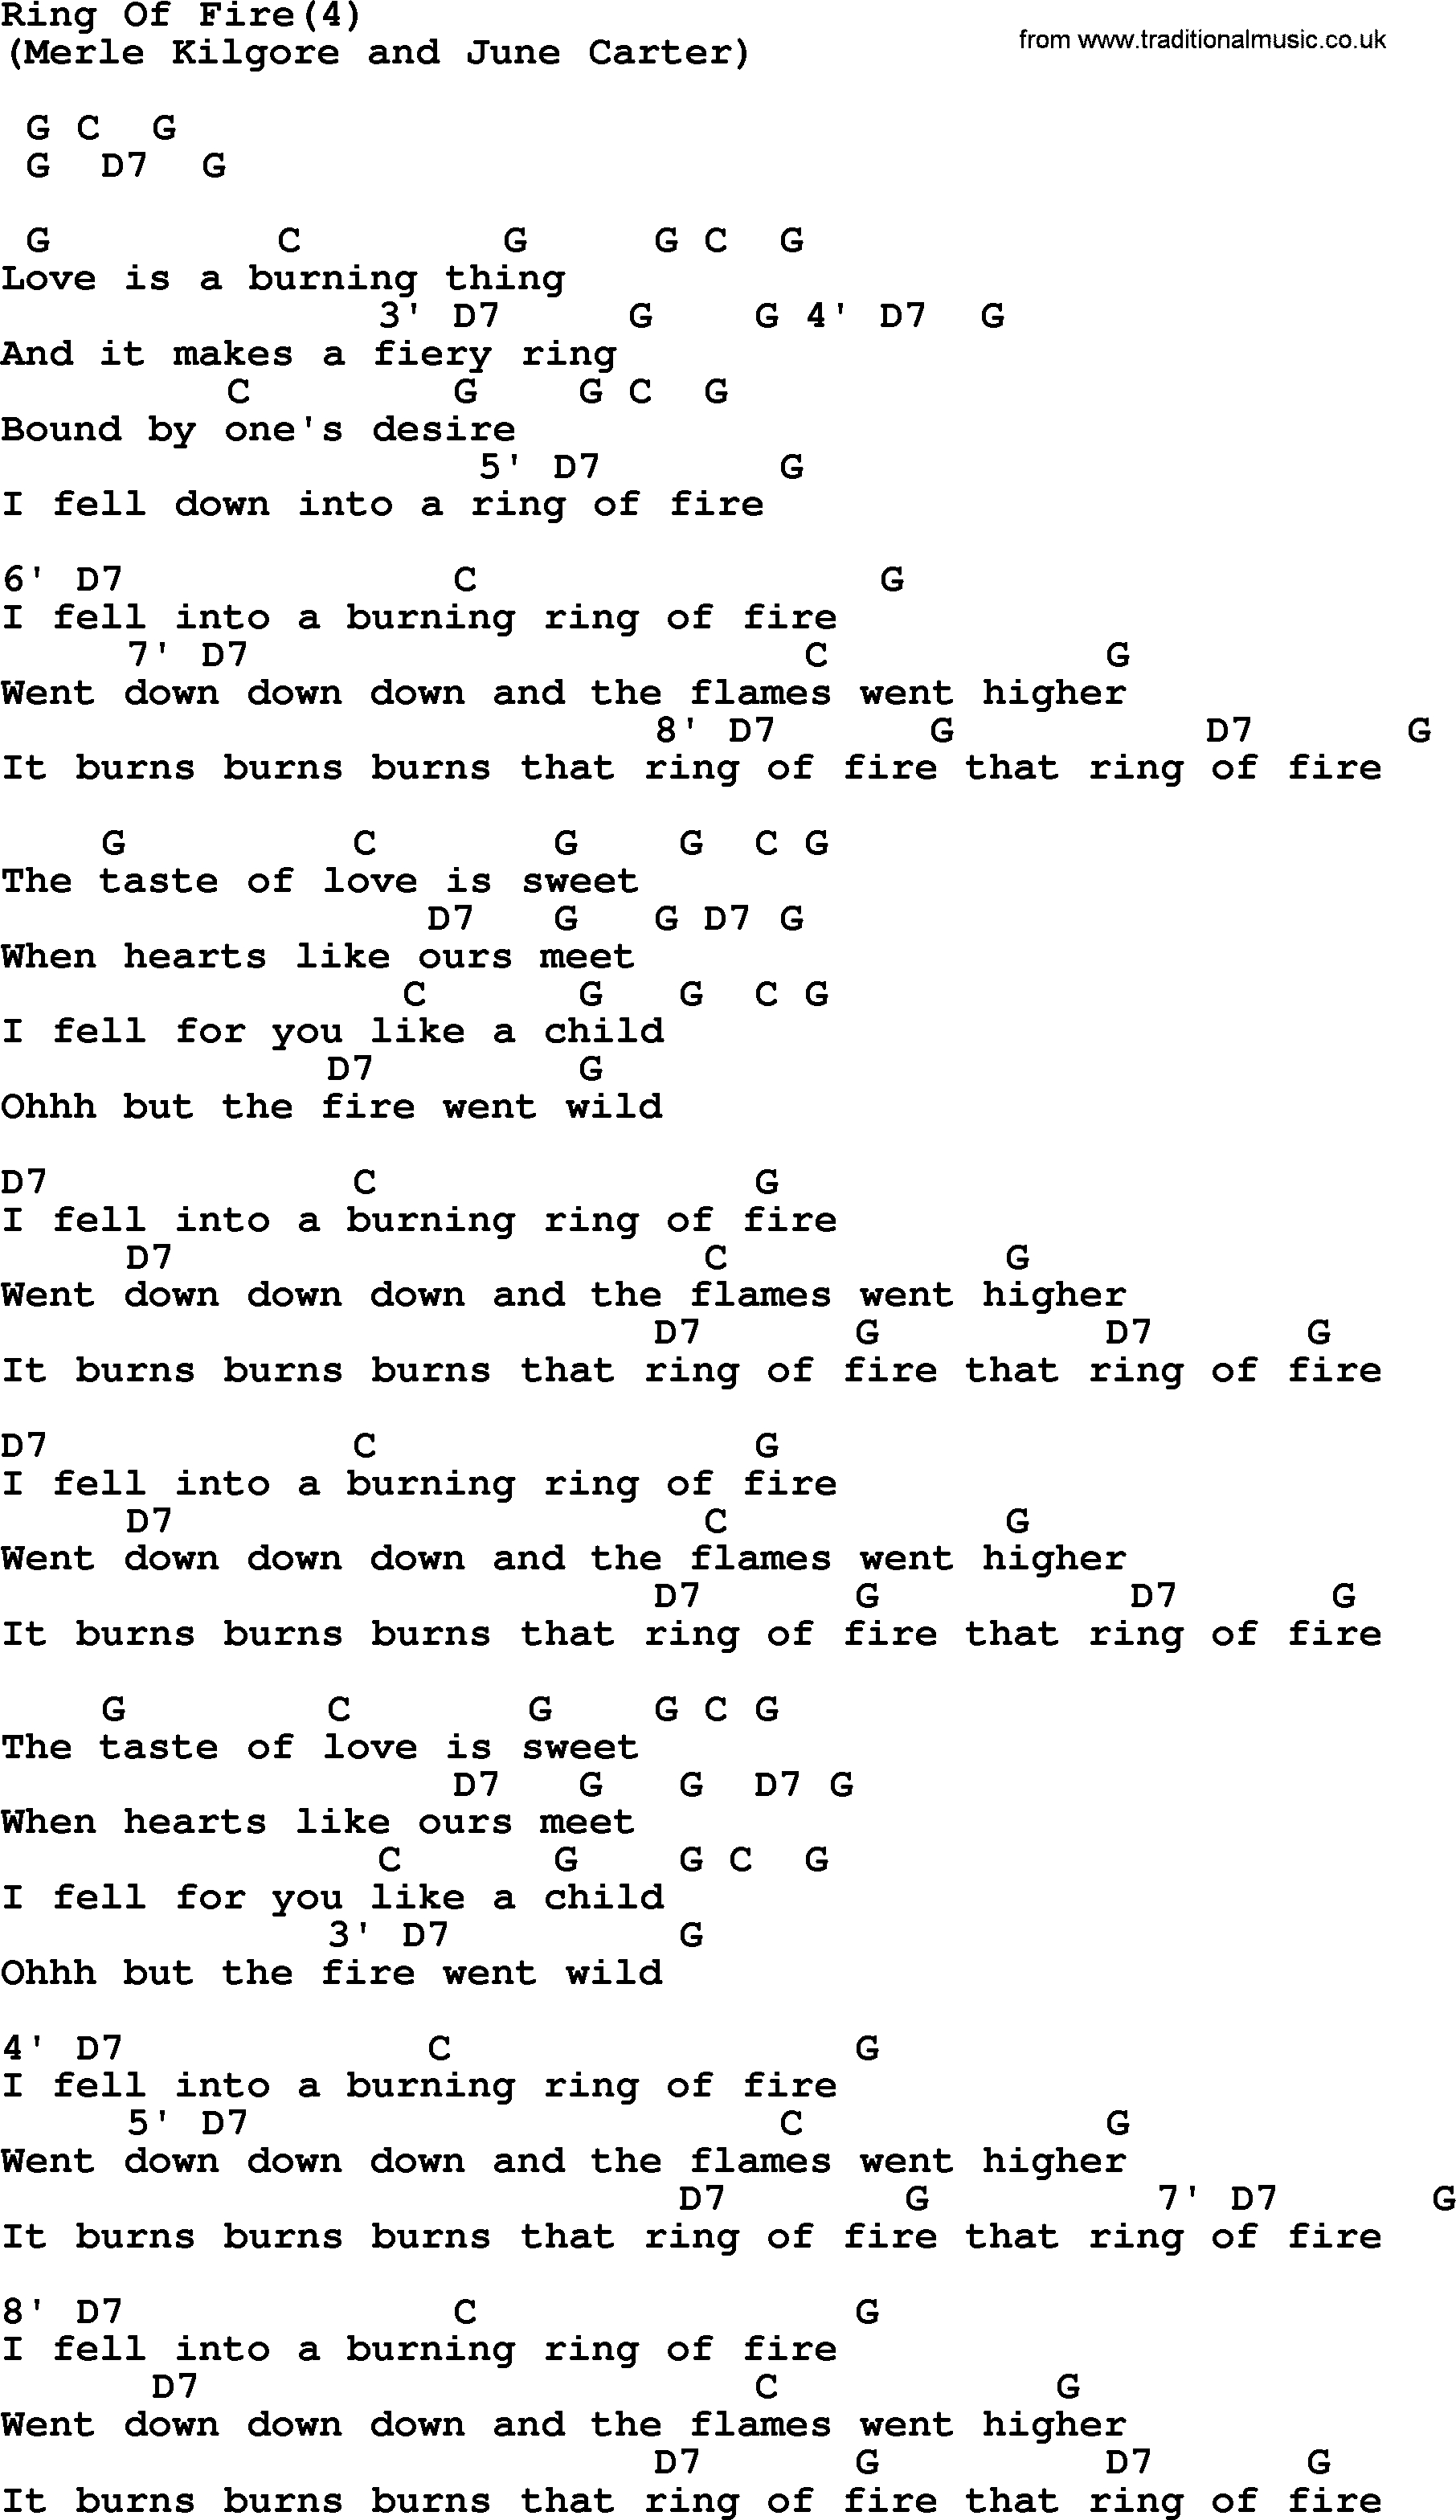 Ring Of Fire Chords Johnny Cash Song Ring Of Fire4 Lyrics And Chords